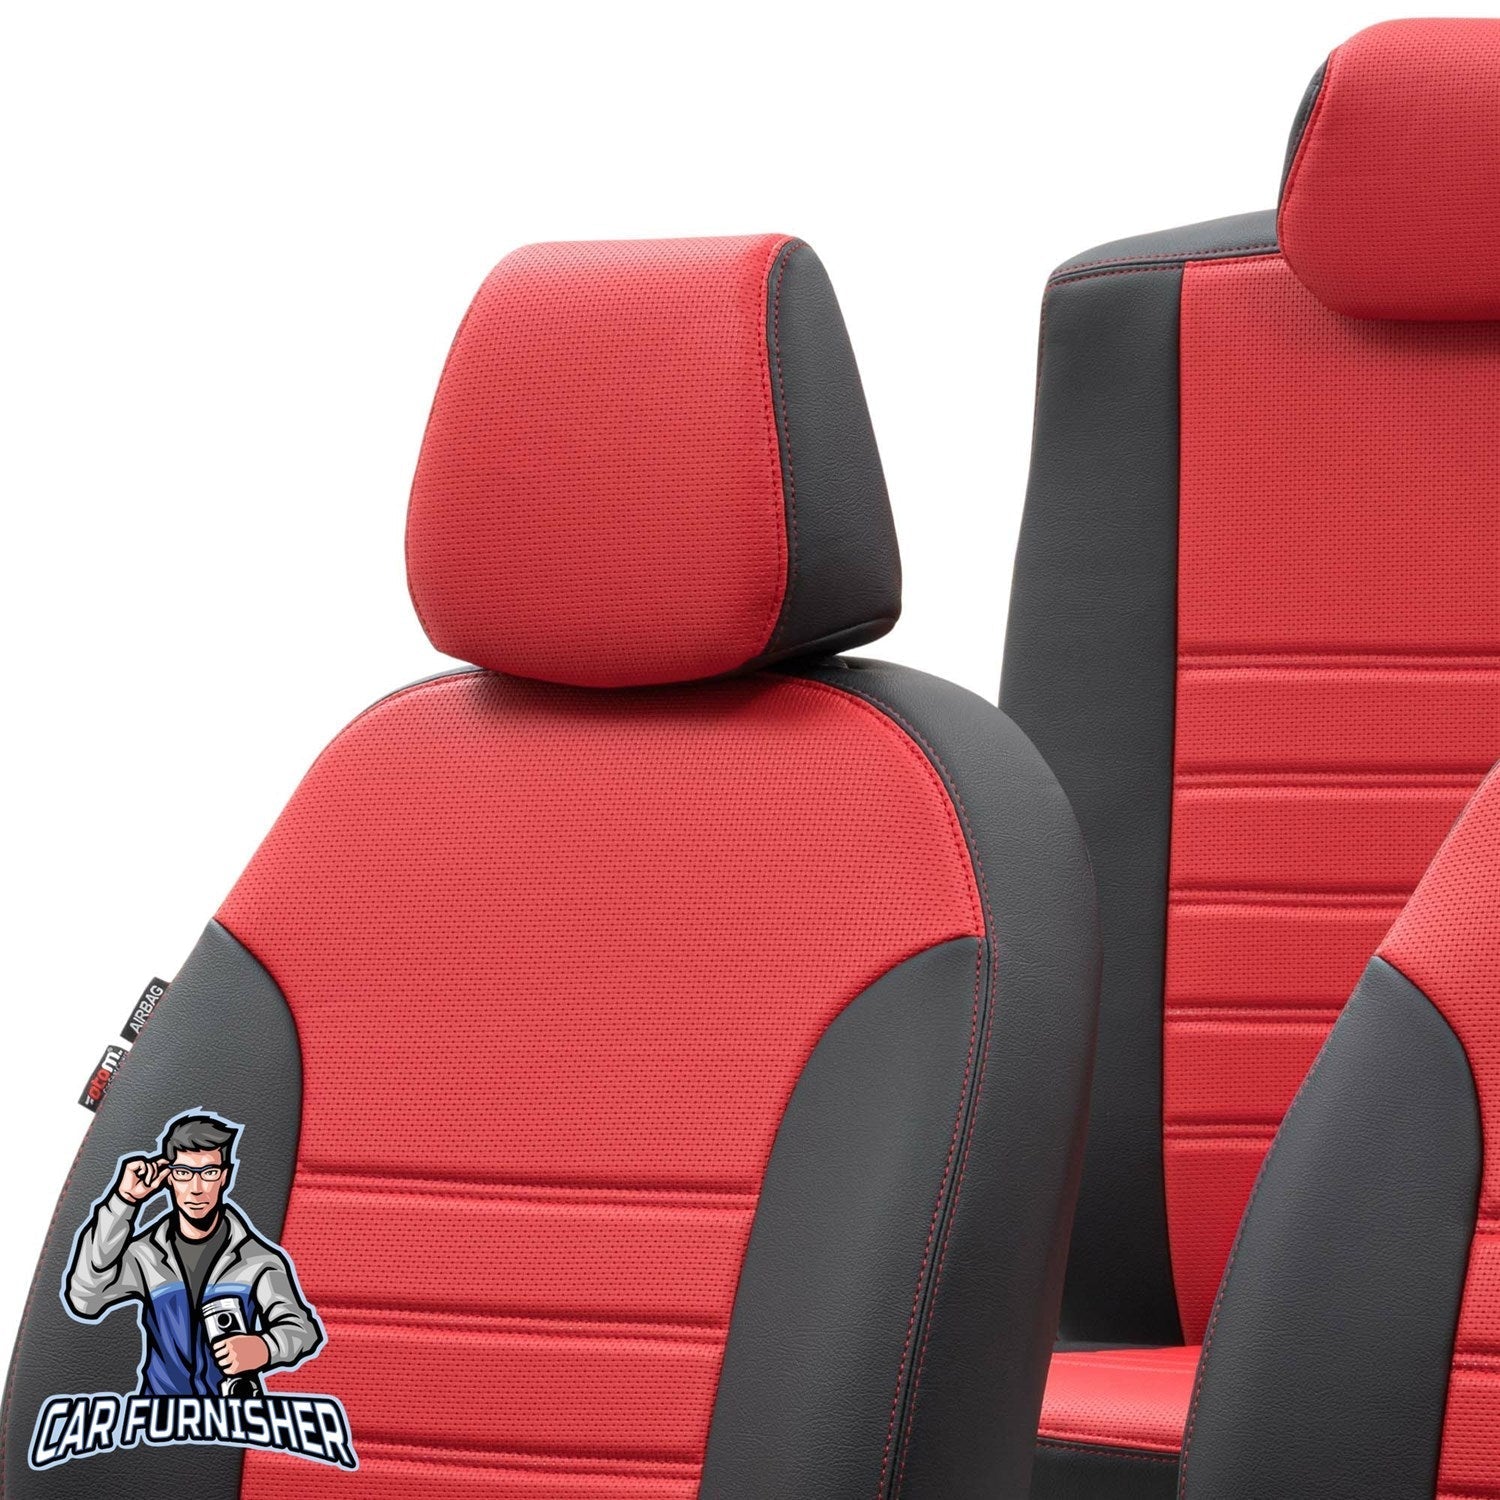 Dacia Sandero Seat Covers New York Leather Design Red Leather